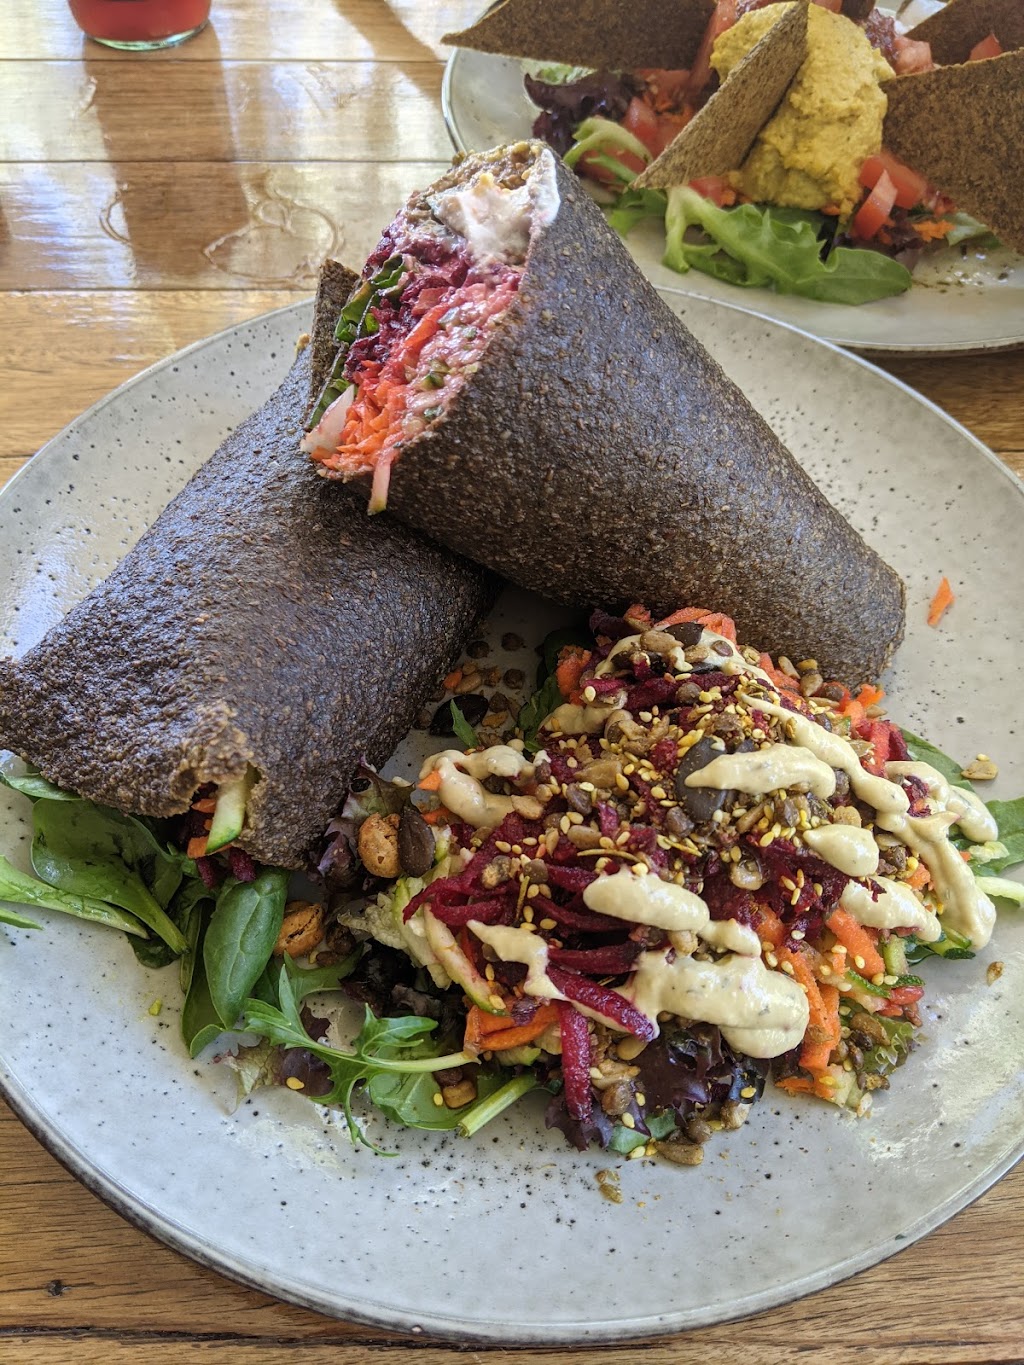 New Earth cafe | cafe | Birtwill St, Coolum Beach QLD 4573, Australia | 0439850980 OR +61 439 850 980